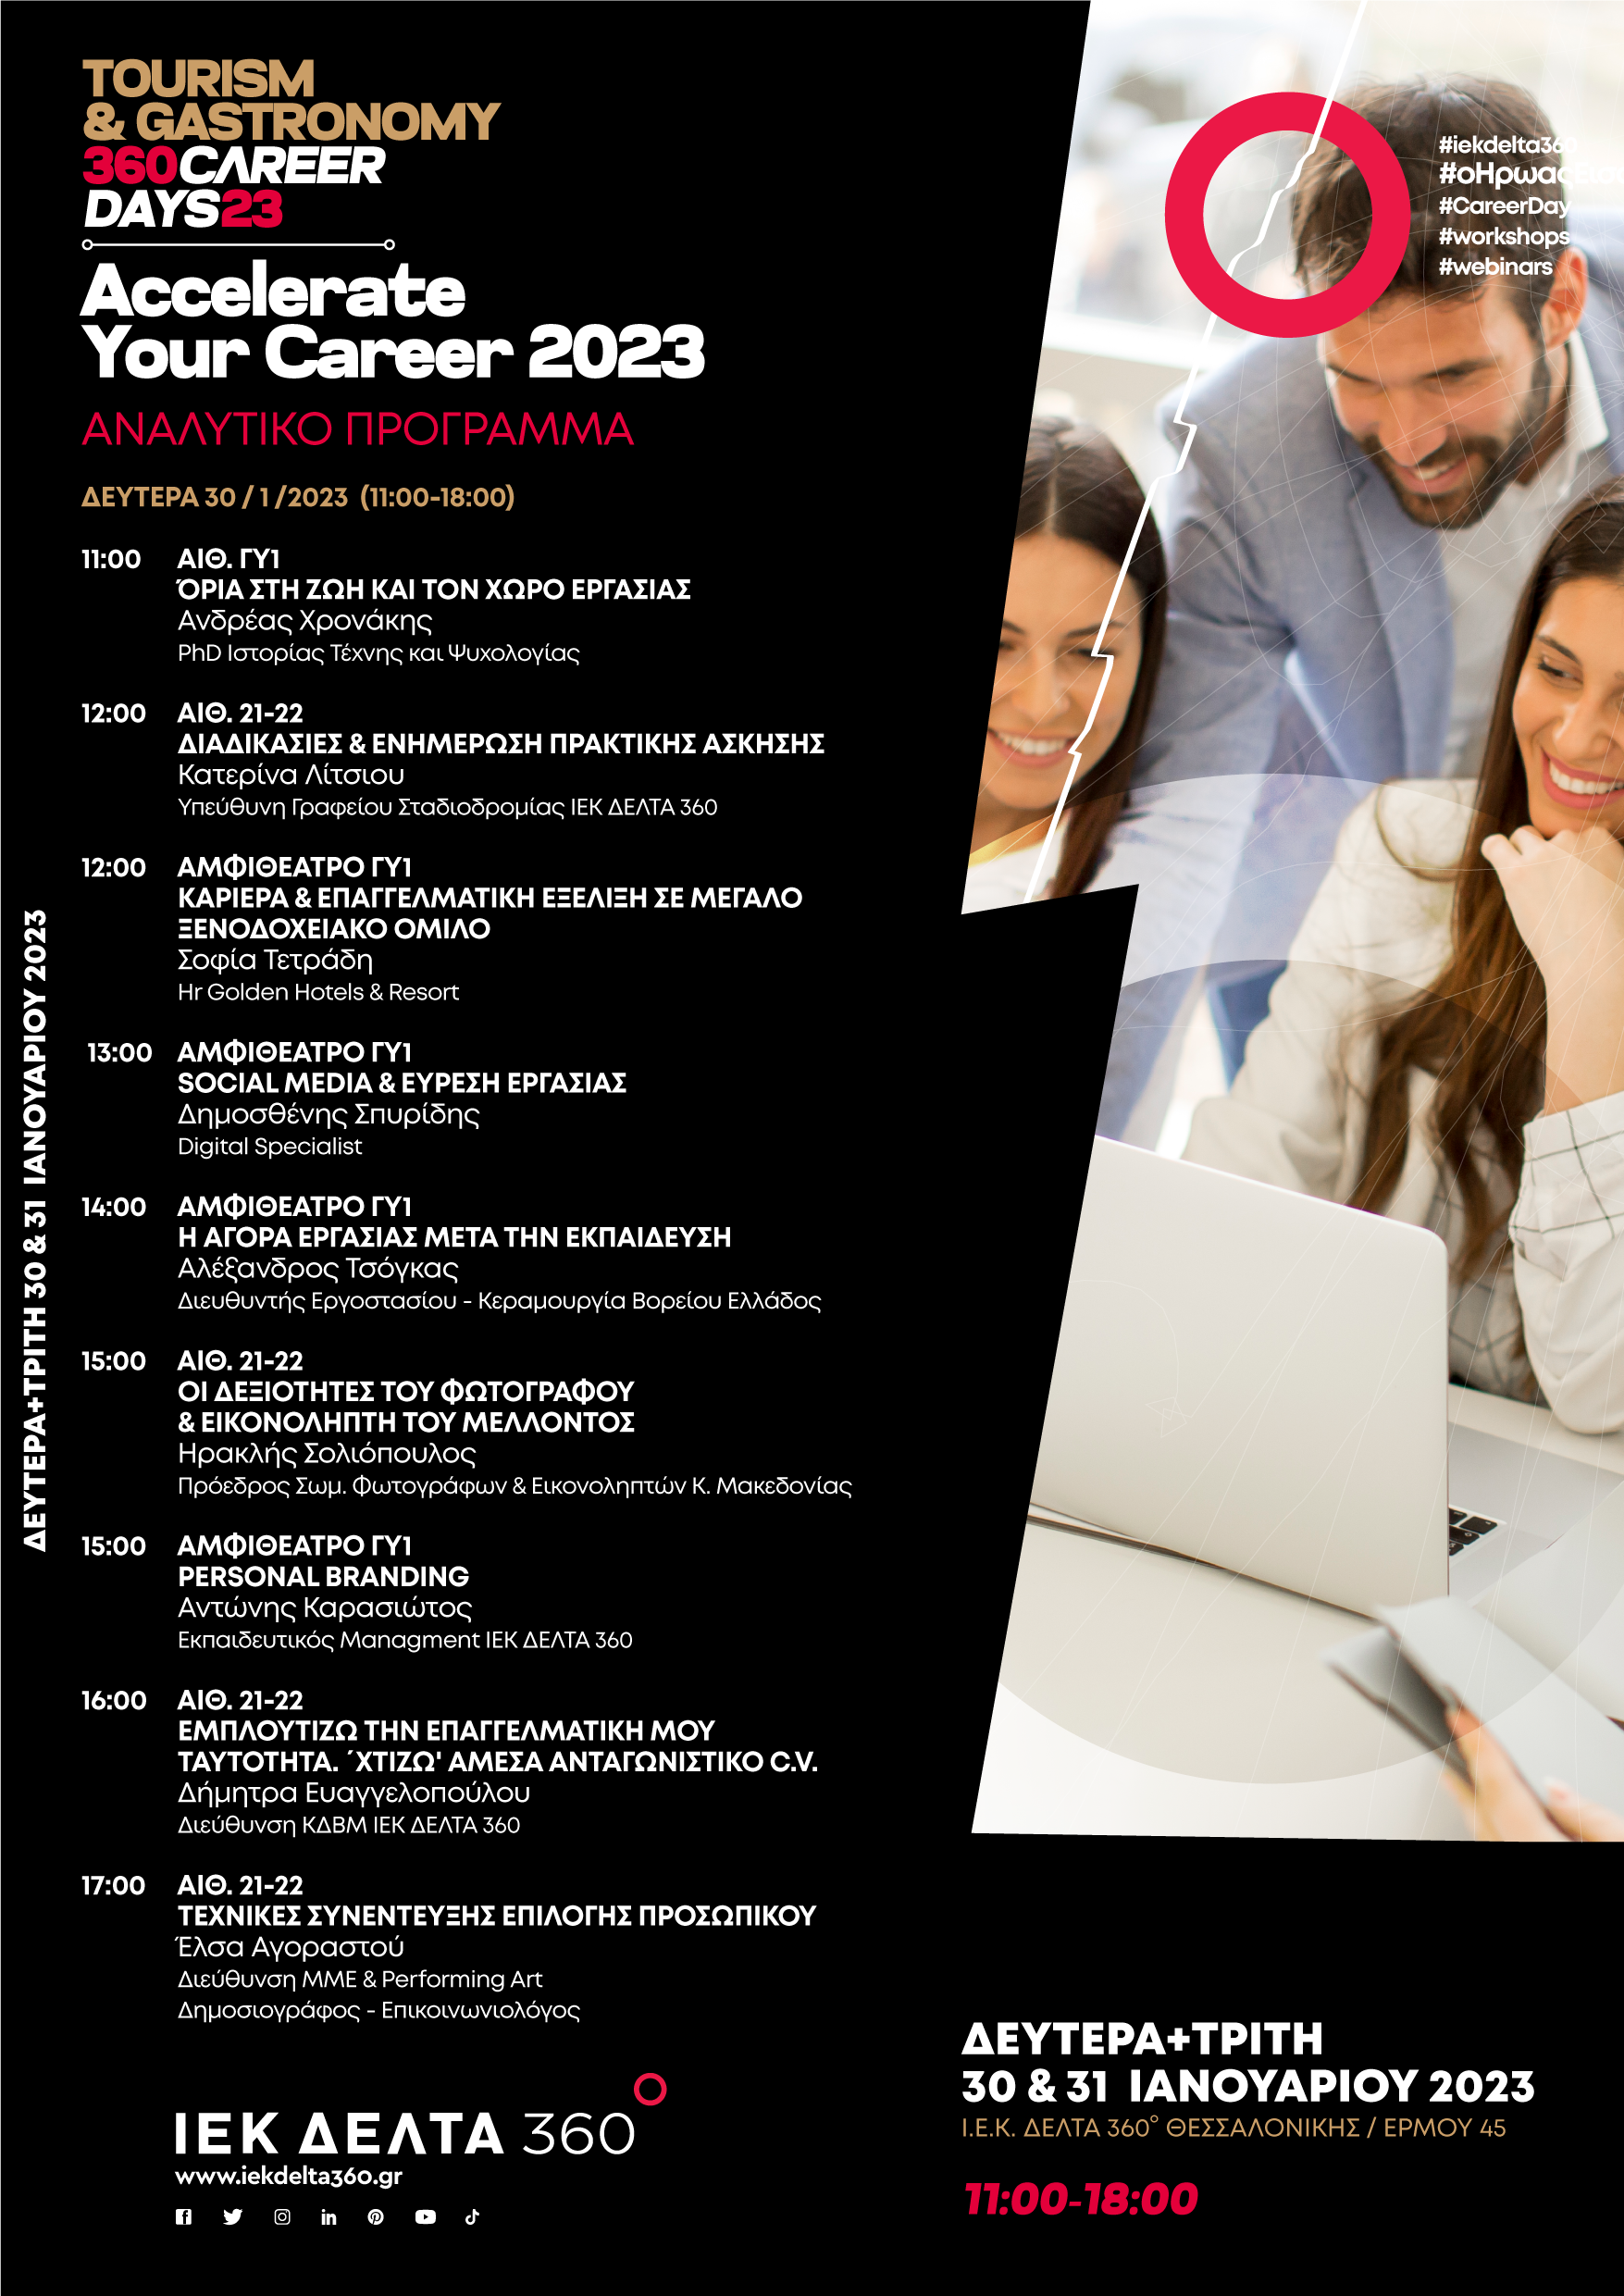 a3-thessaloniki-tourism-career-day-2023-03.png